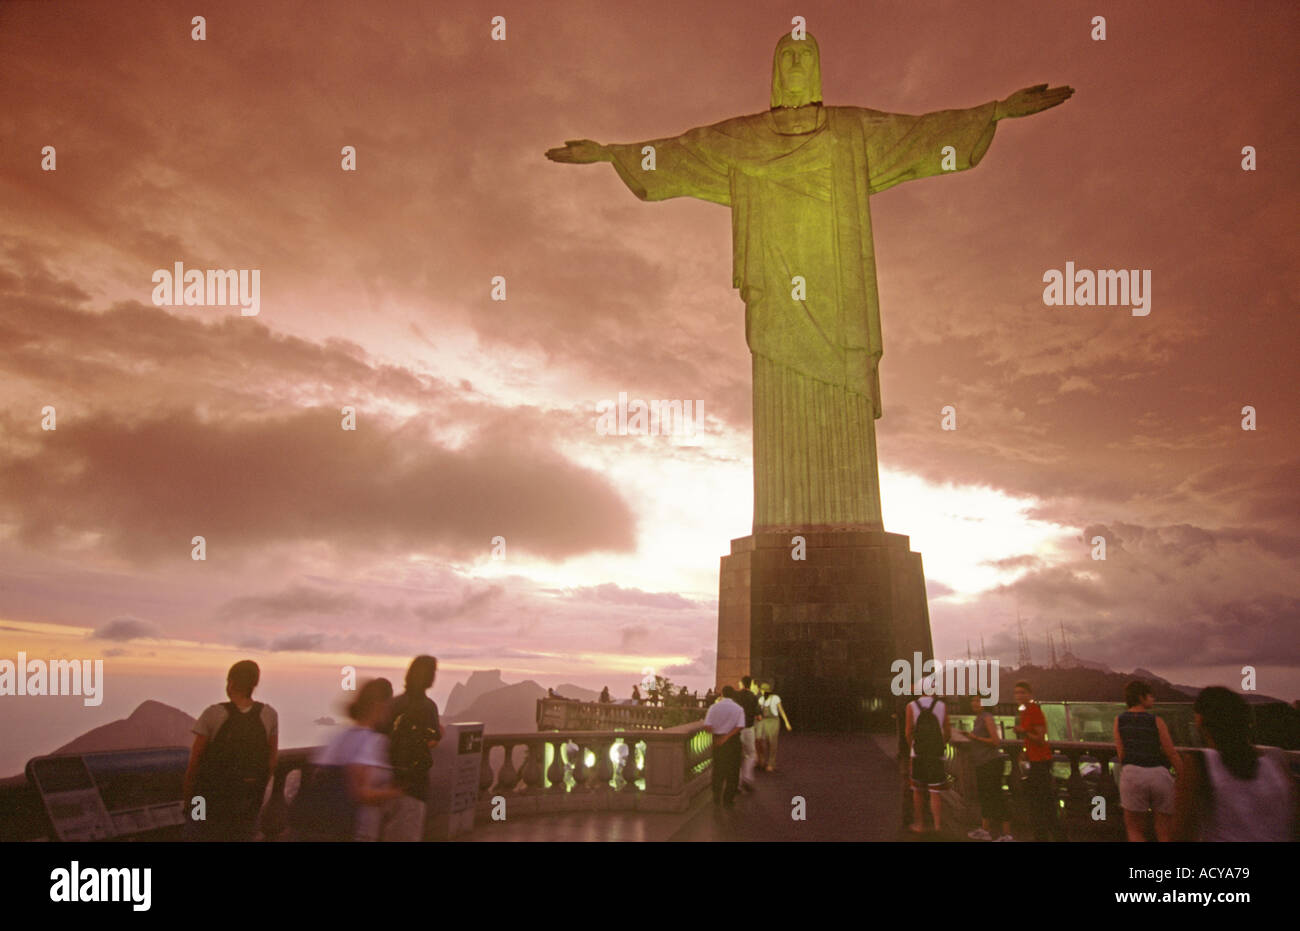 Brasil Rio de Janeiro Corcovado Hill Christ the Redeemer Statue on top 710m on Mount Corcovado sunset people Stock Photo